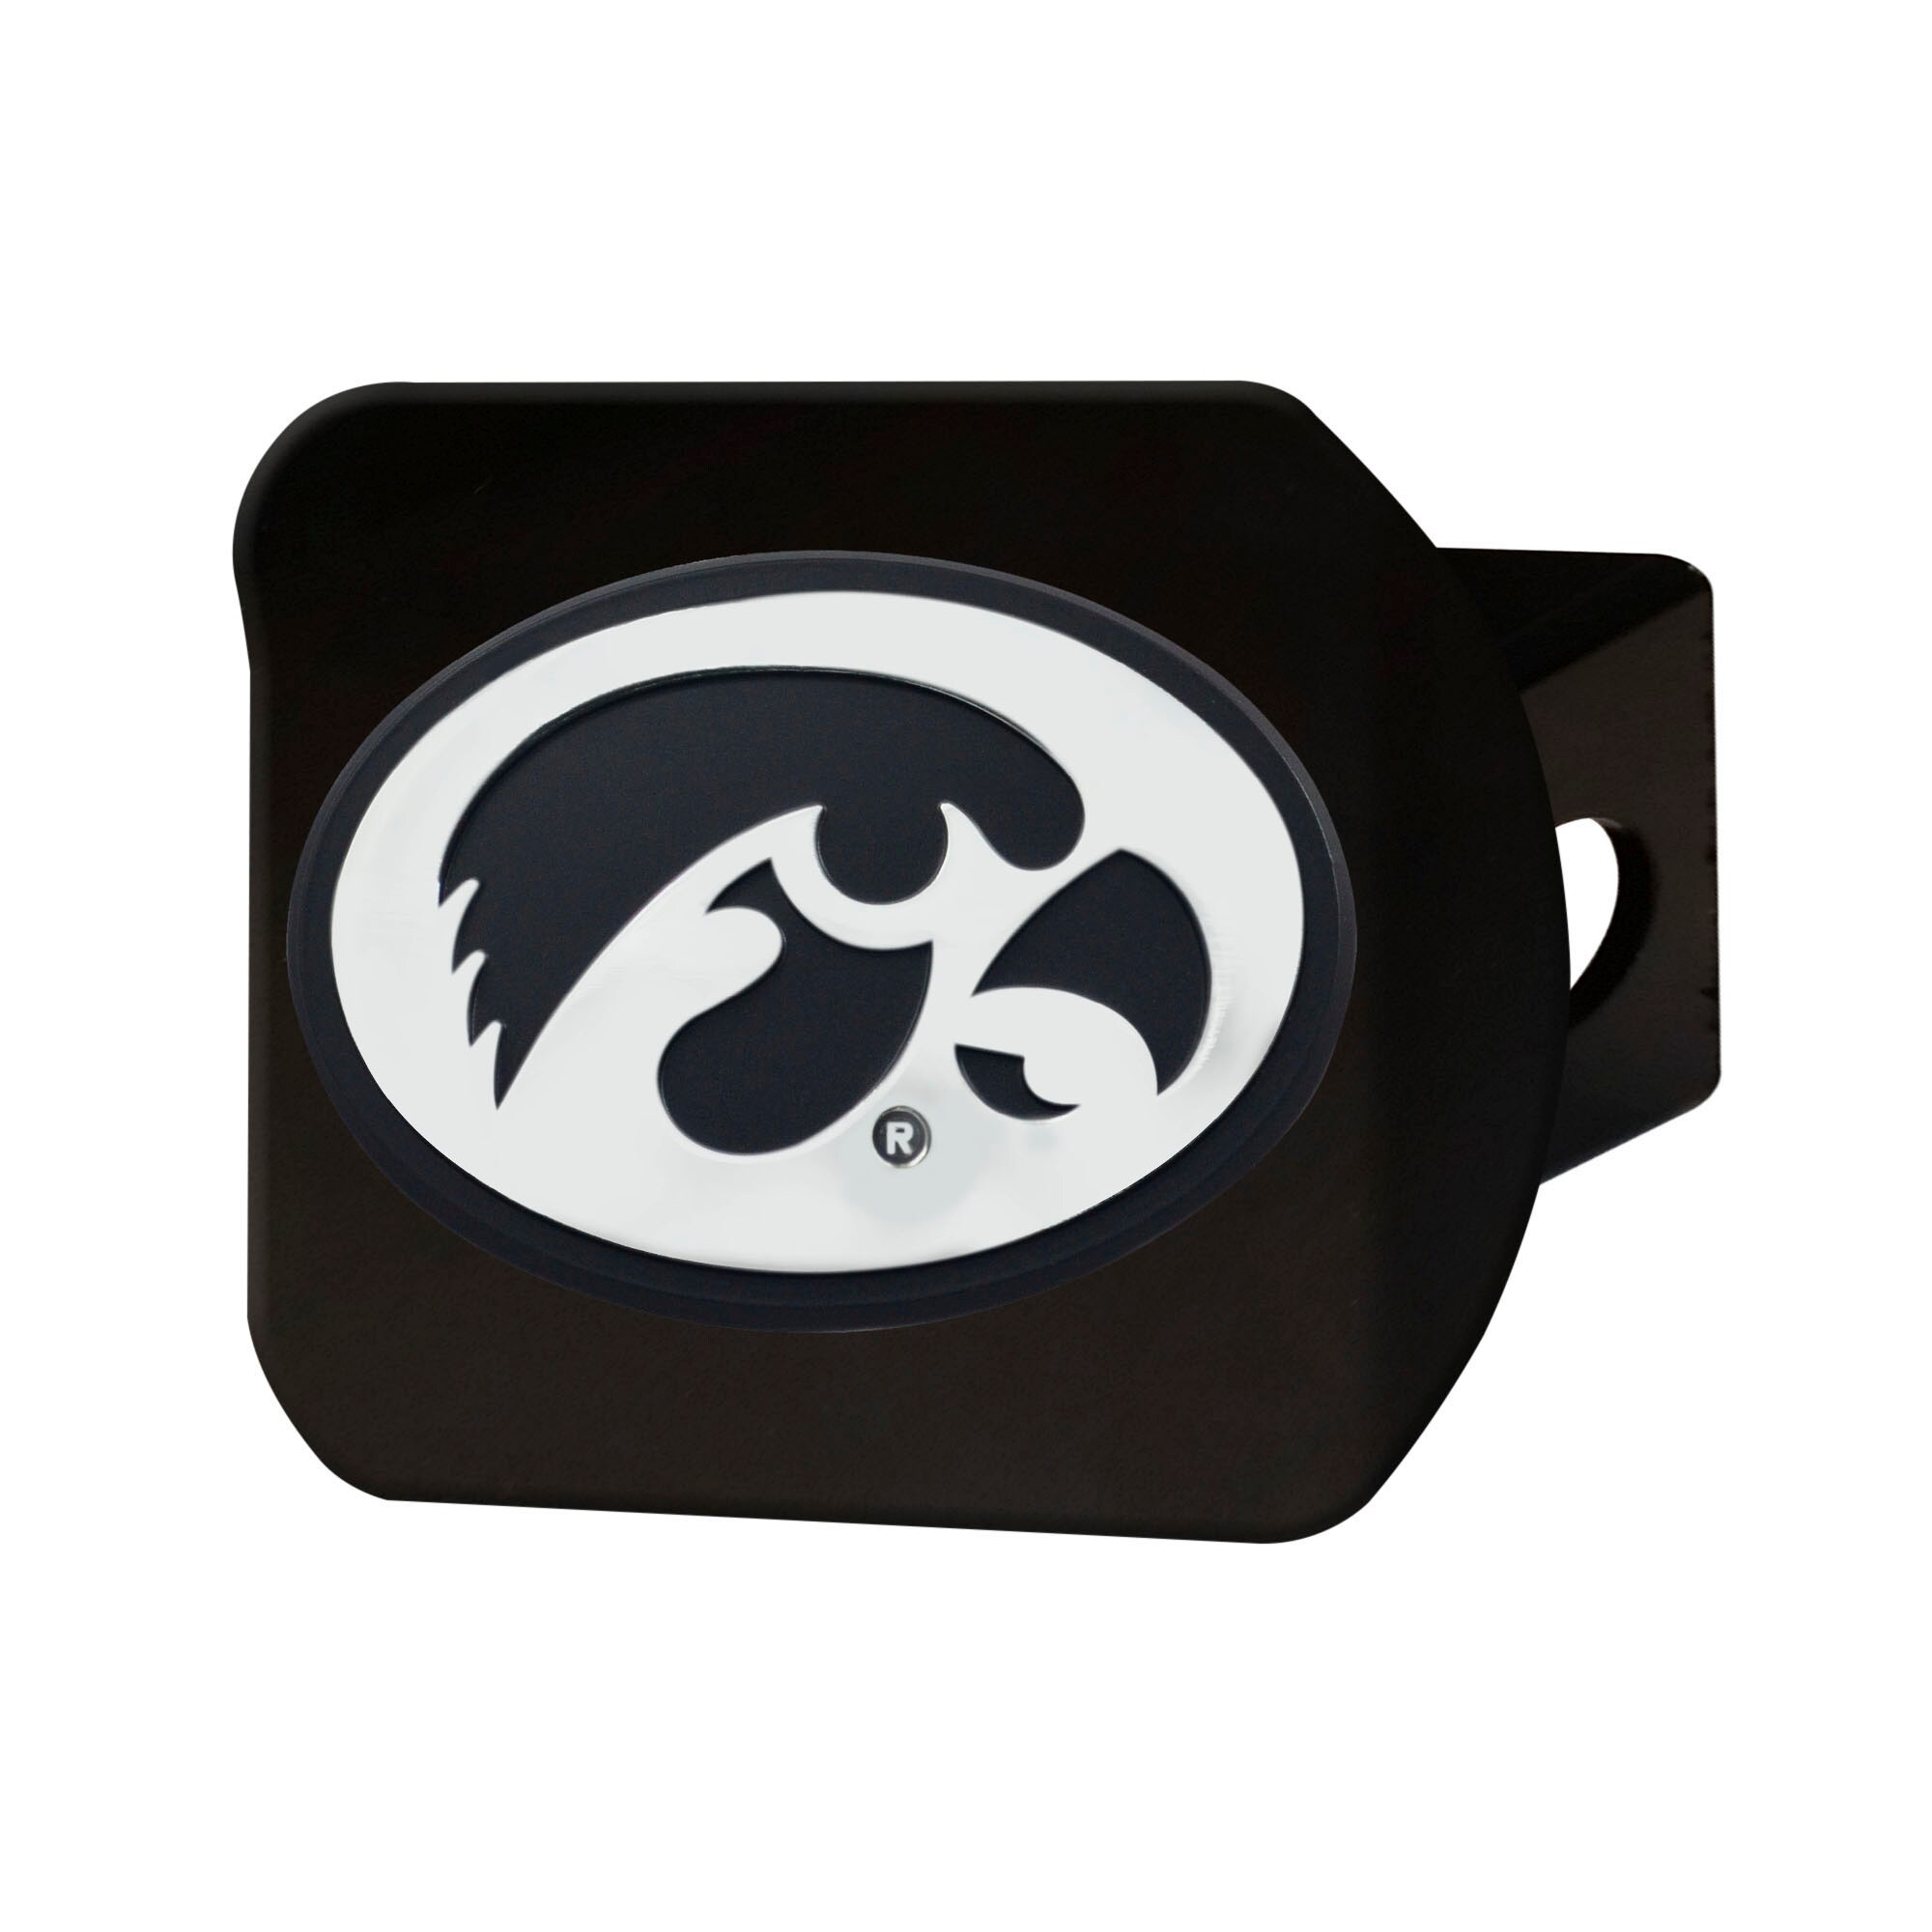 FANMATS NCAA Black Hitch Cover at Lowes.com